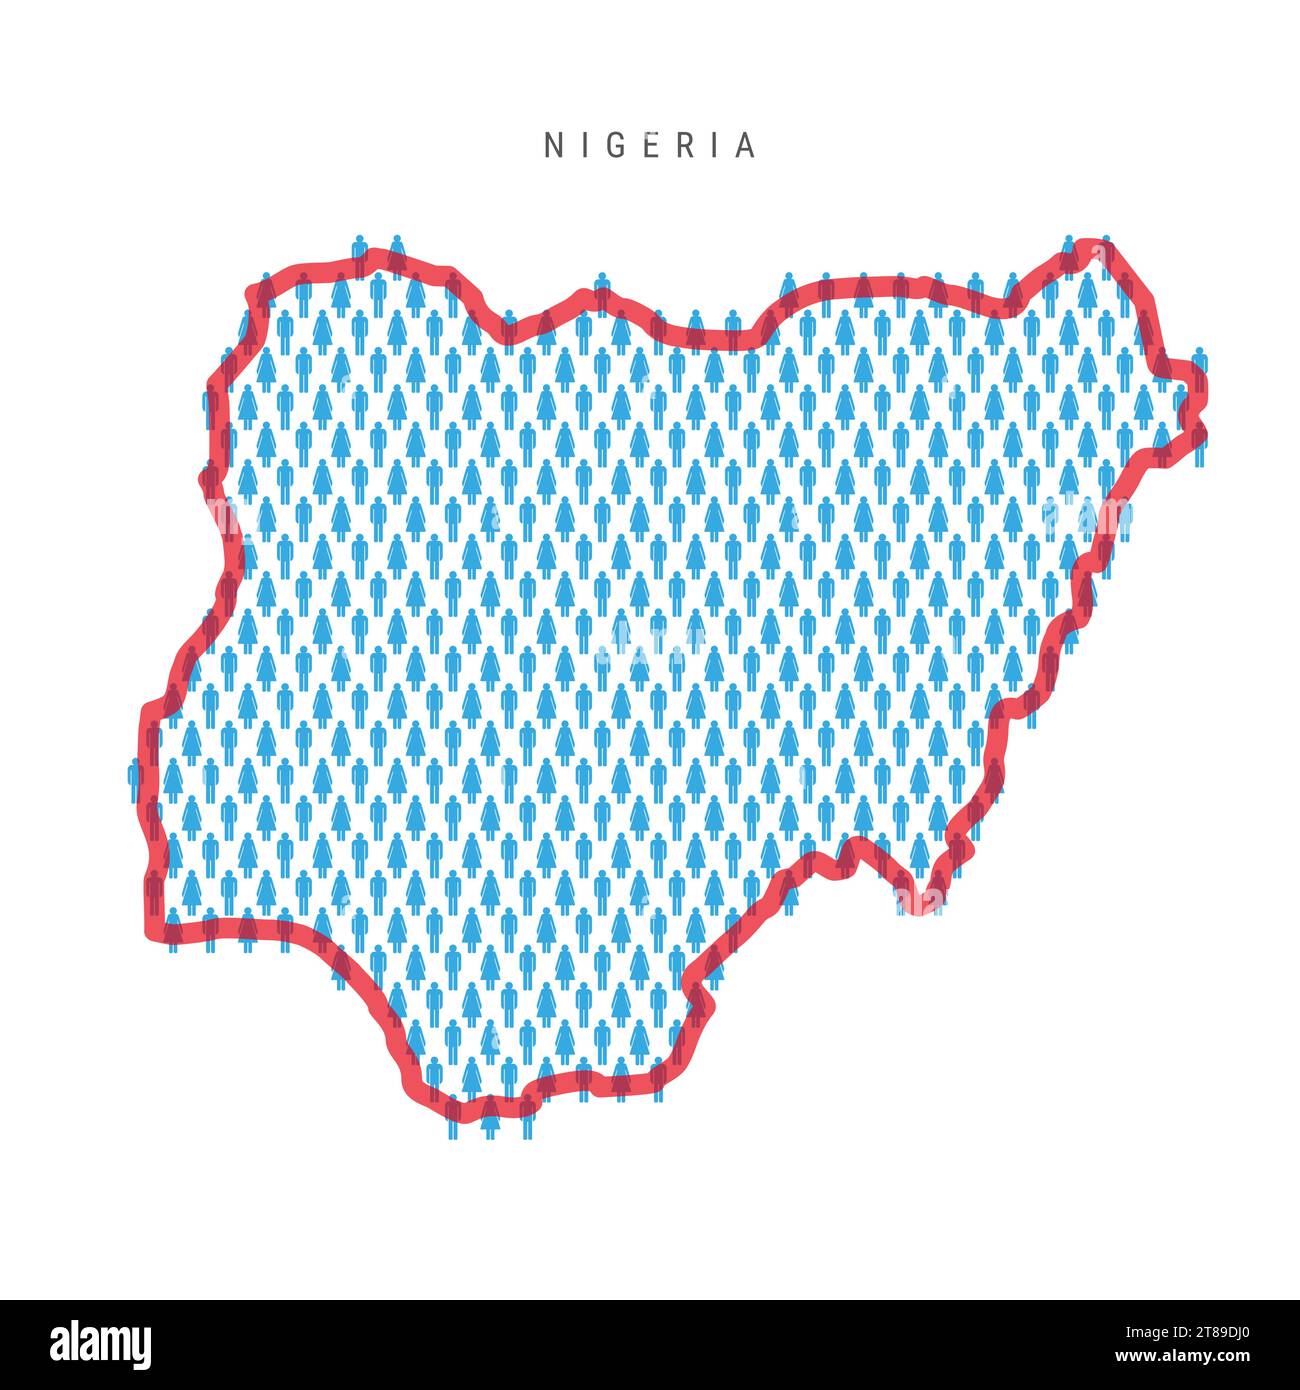 Nigeria population map. Stick figures Nigerian people map with bold red translucent country border. Pattern of men and women icons. Isolated vector il Stock Vector